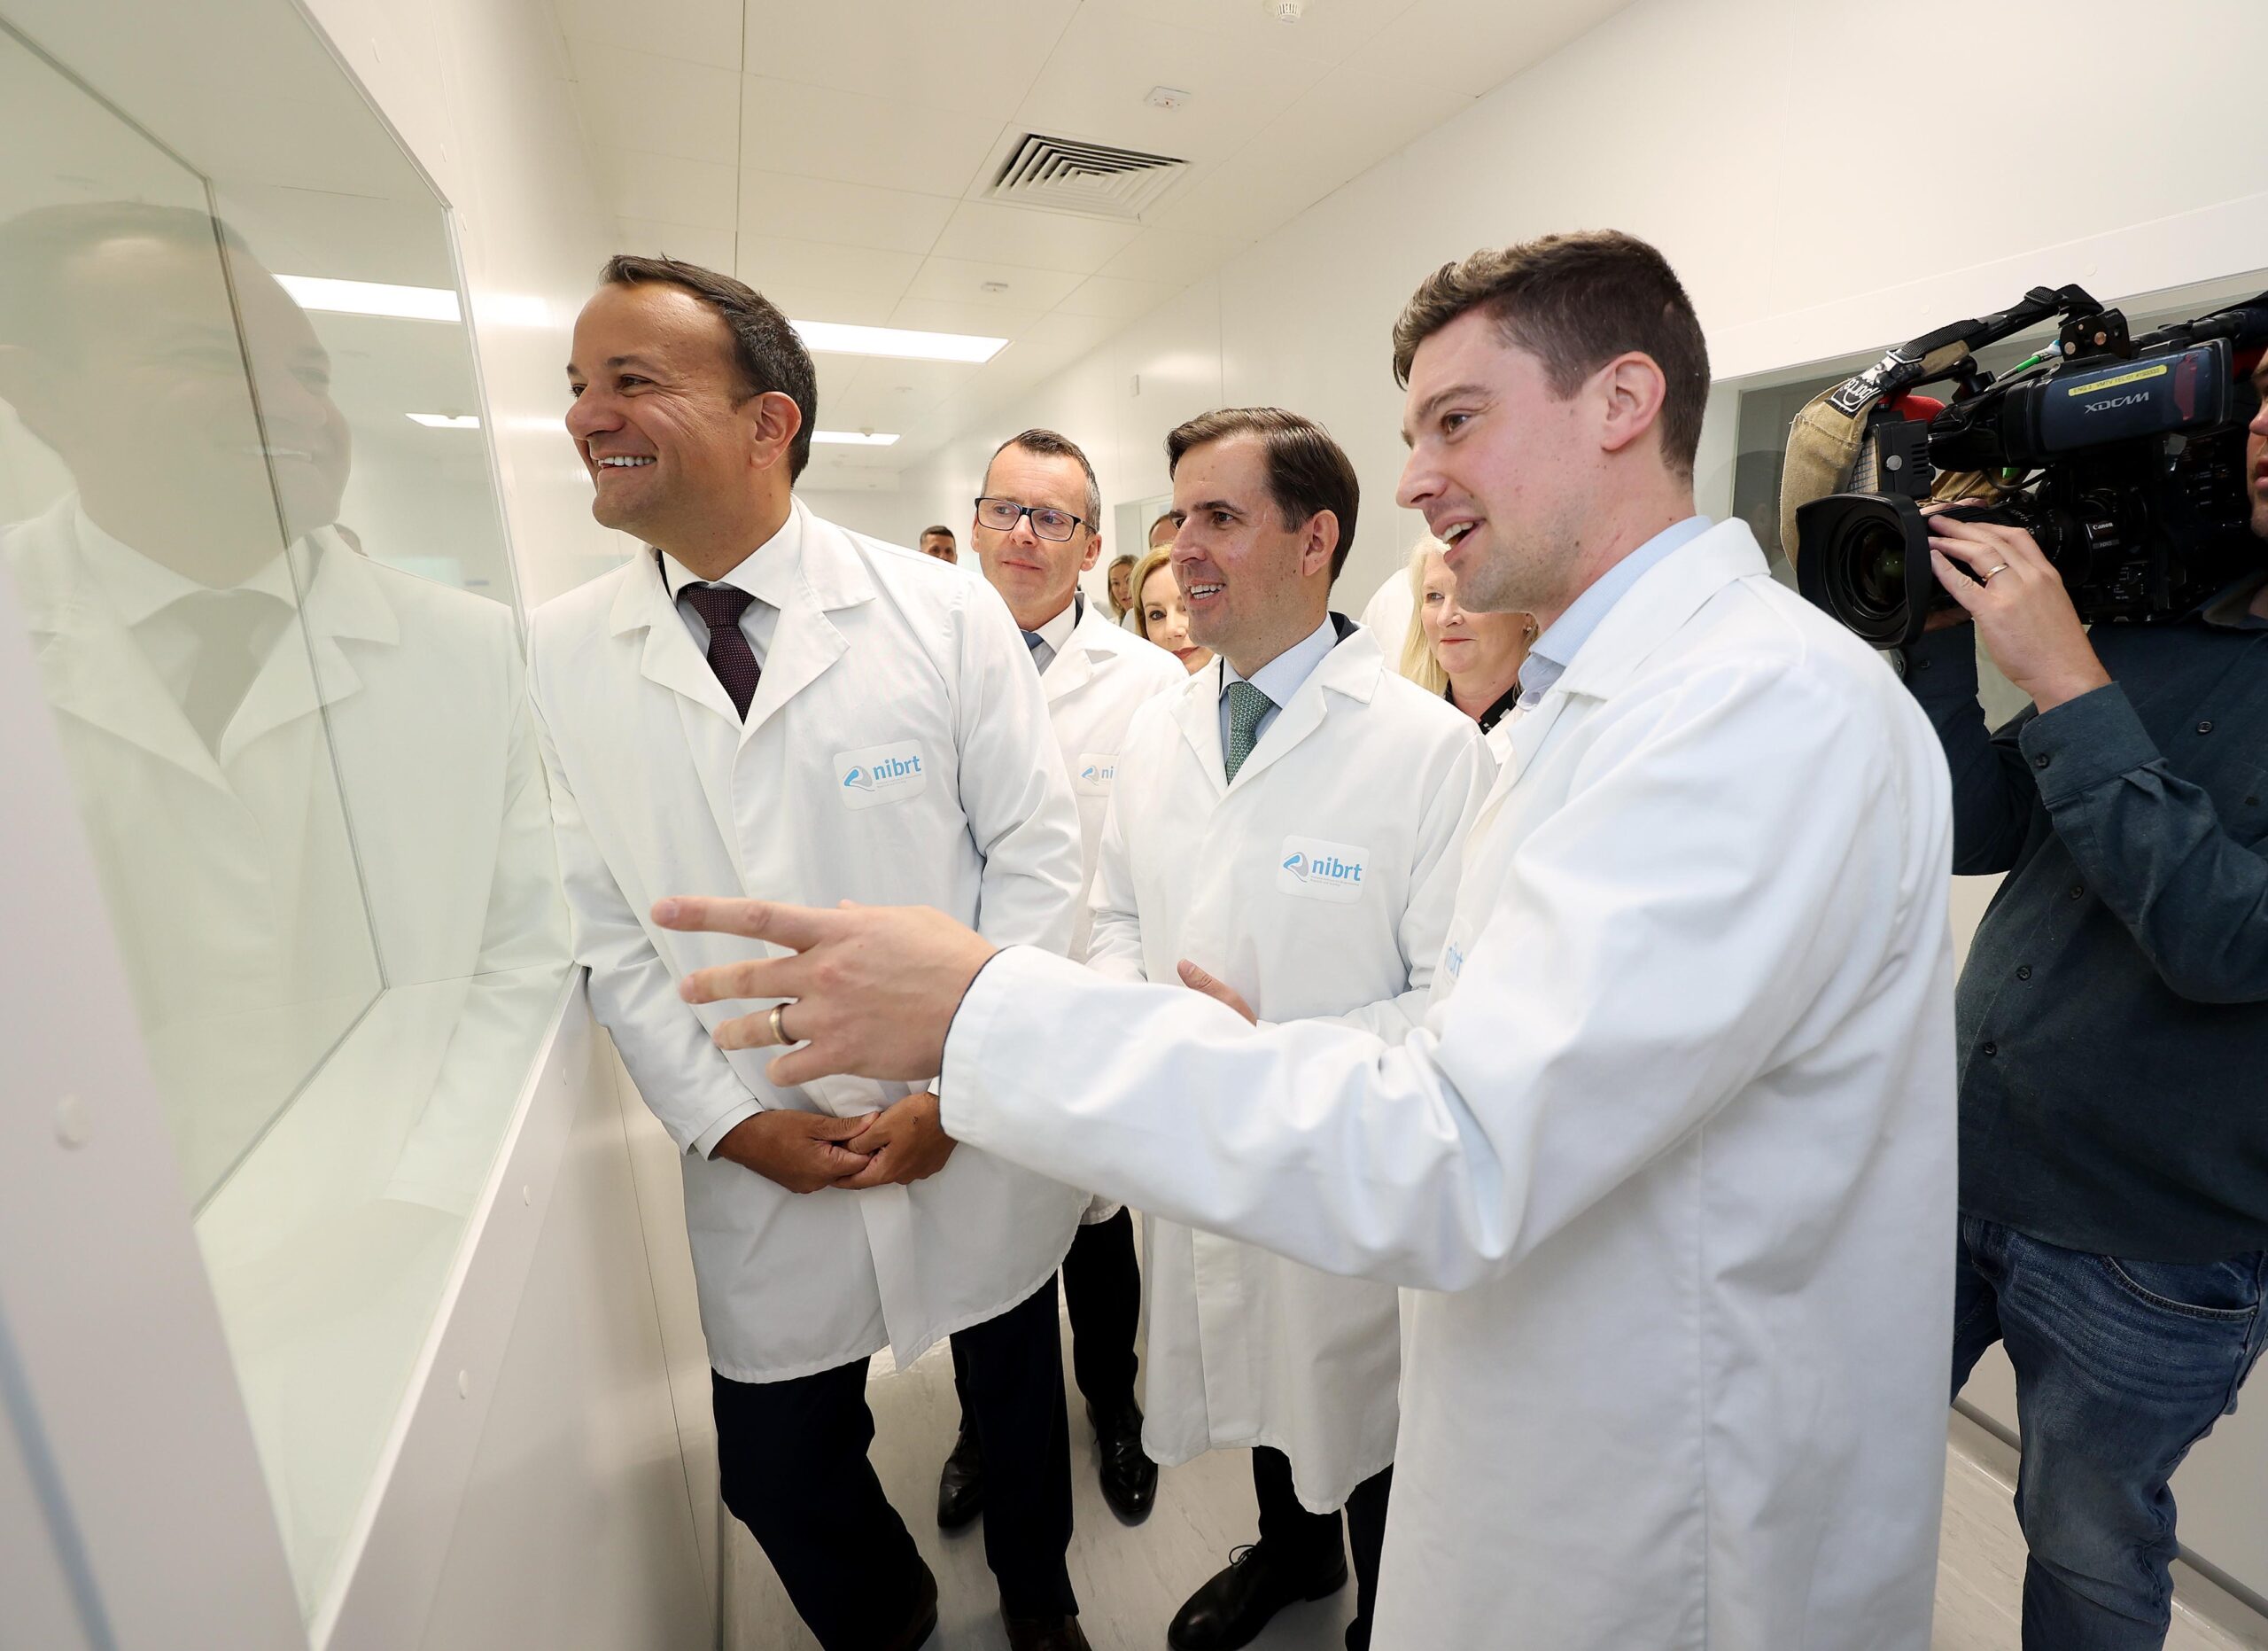 No Repro Fee.
An Tánaiste Leo Varadkar TD, Minister for Enterprise, Trade and Employment (left) with Darrin Morrissey, CEO of NIBRT, Martin Shanahan, CEO, IDA Ireland and Adam Pritchard,  
Training Team lead at NIBRT (right), pictured at the construction site launch of 
the National Institute for Bioprocessing Research and Training’s state-of-the-art advanced therapeutics research and training facility which expects to complete by the second quarter of 2023. Pic. Robbie Reynolds